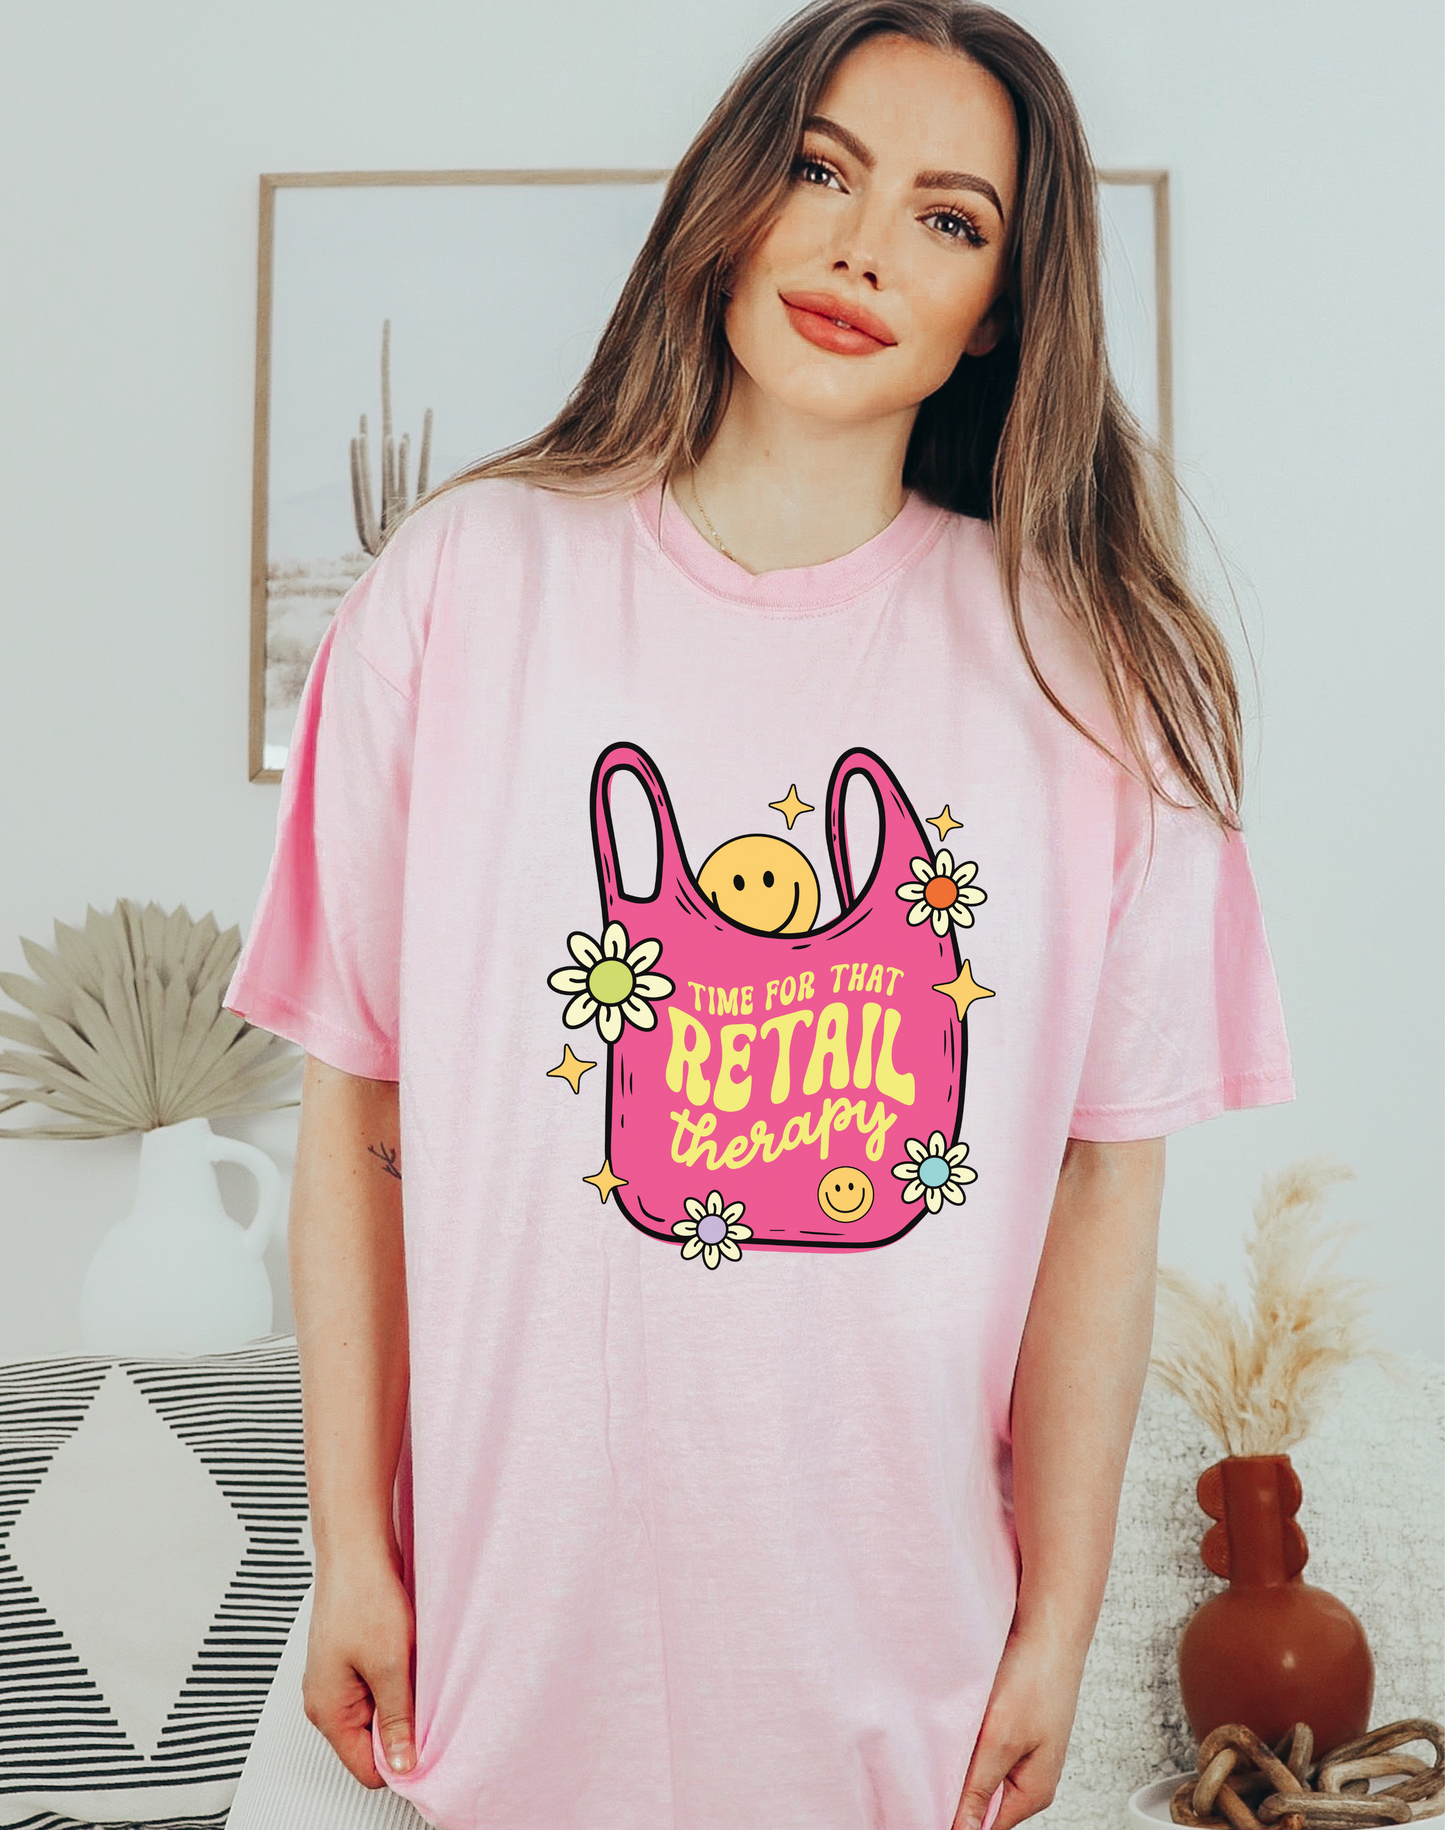 Retail Therapy Tee